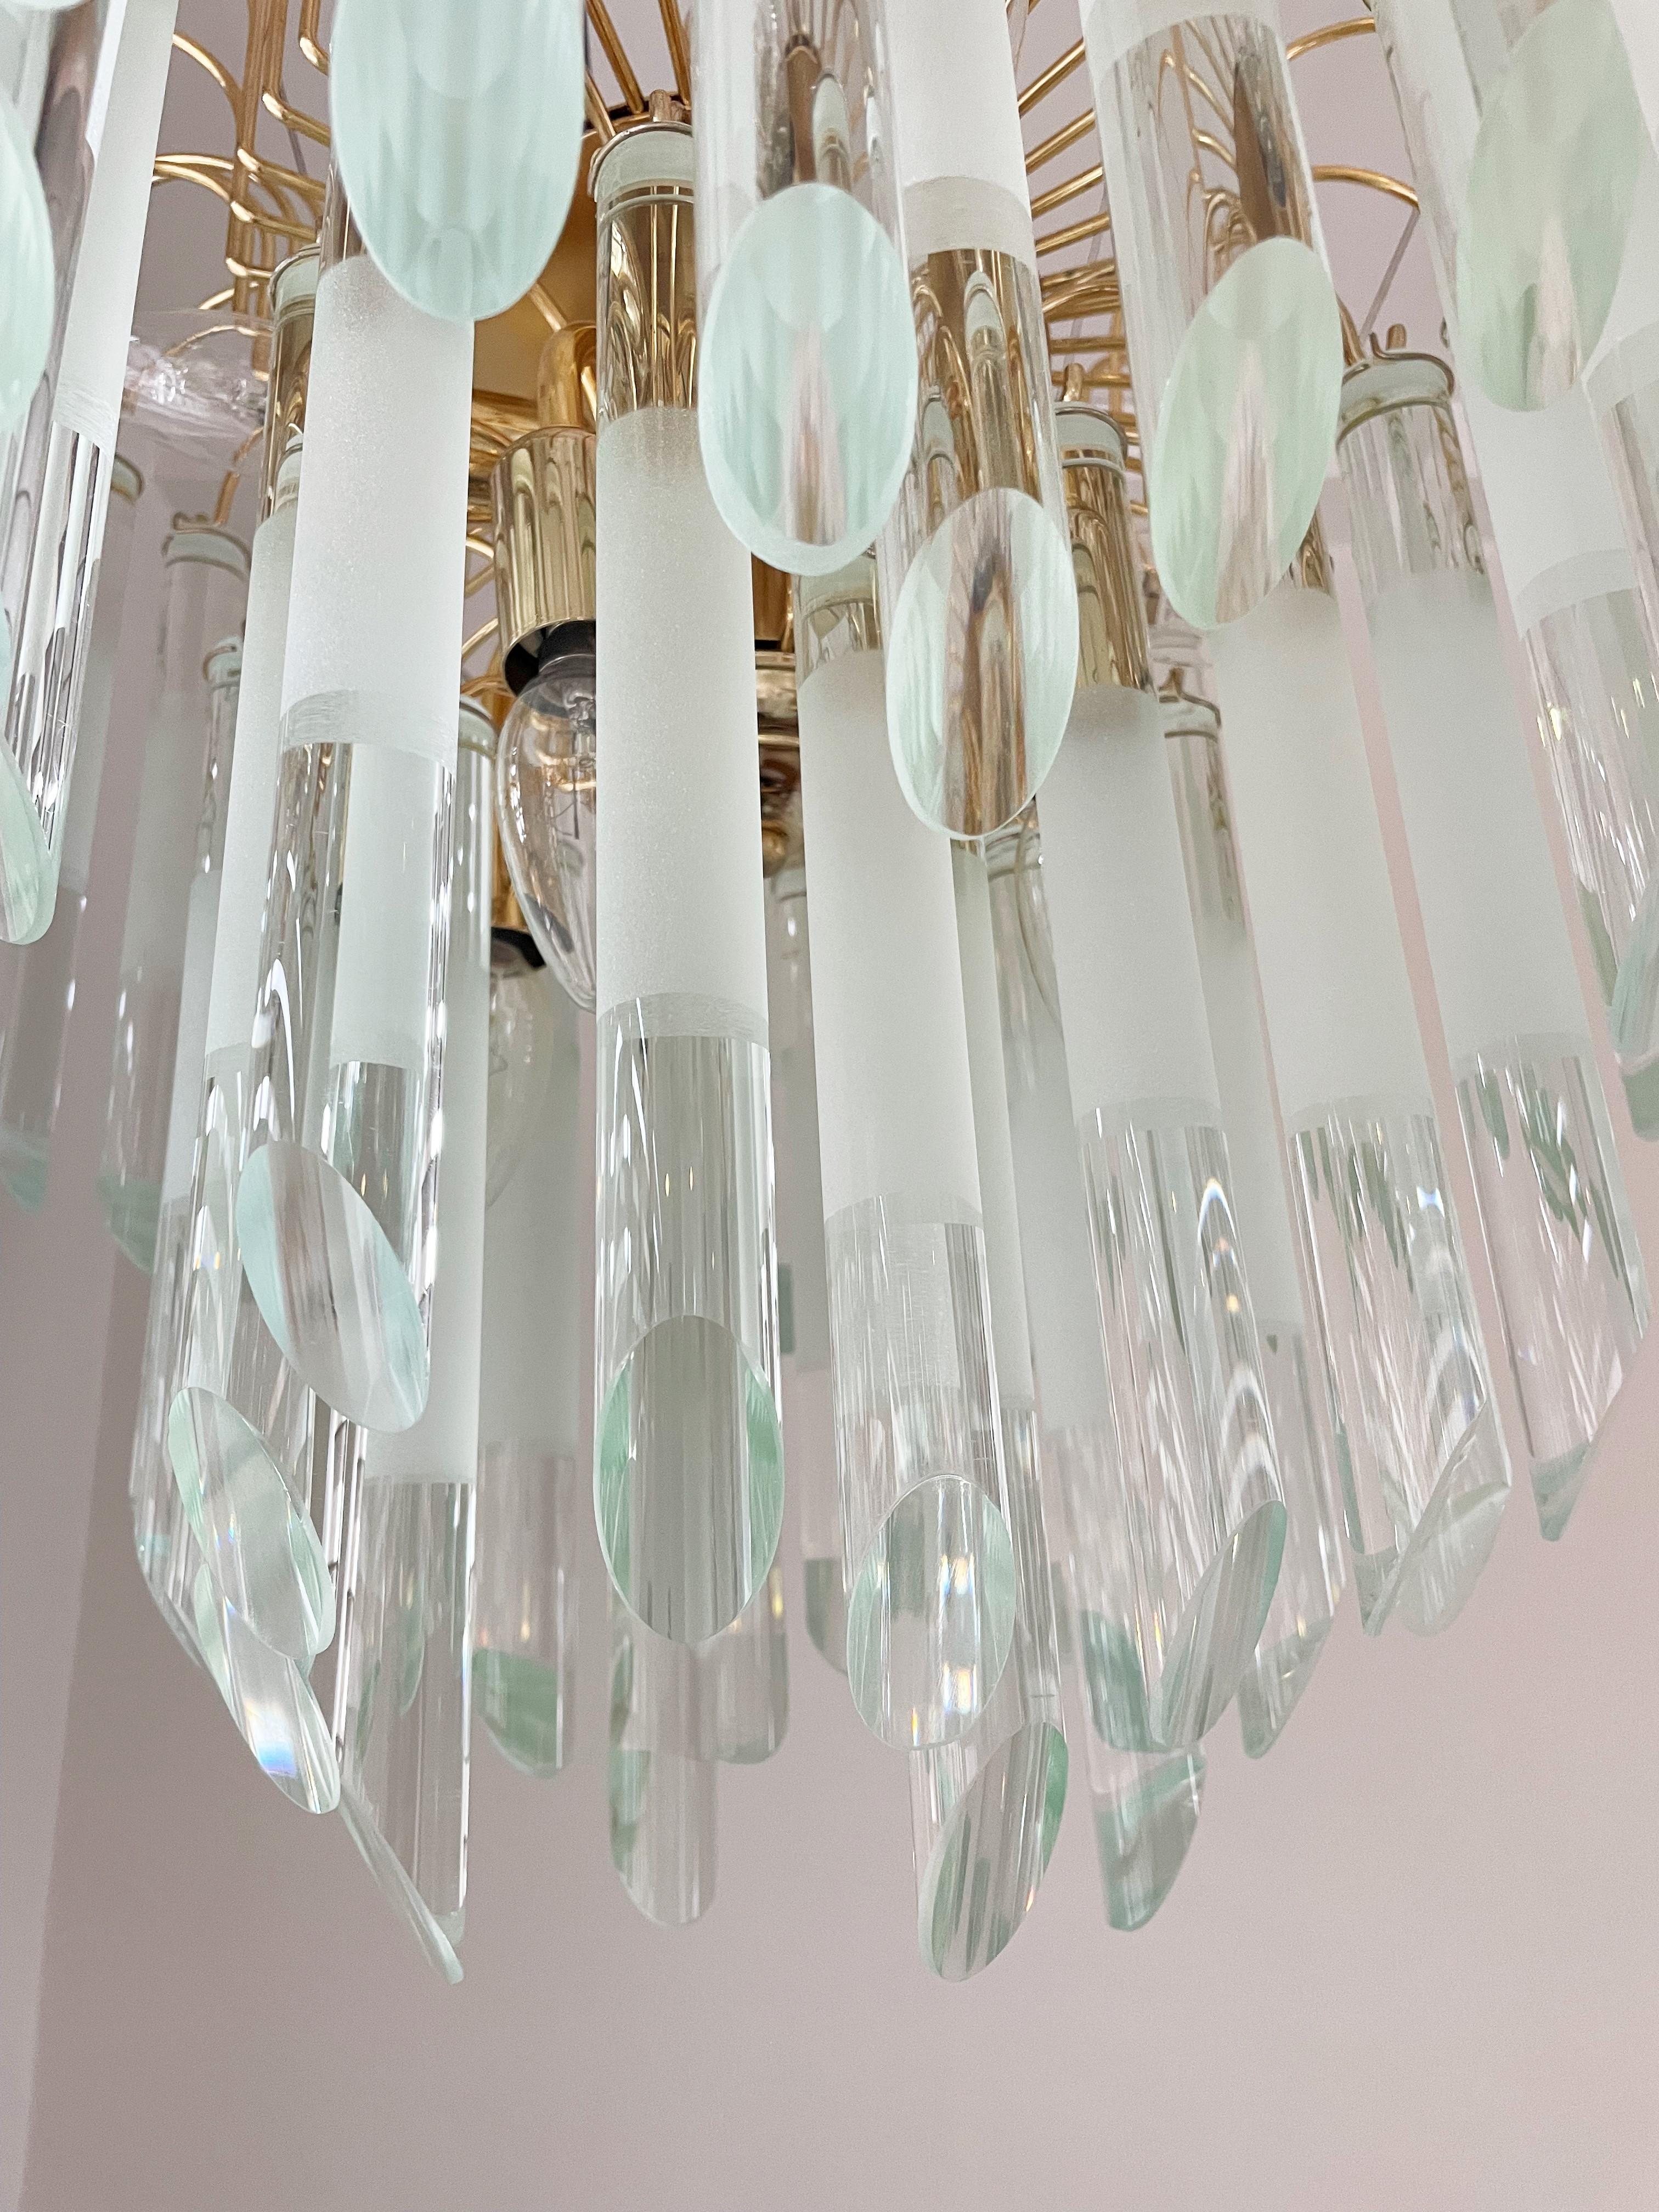 Striking chandelier in the manner of Paolo Venini with cut glass droplets with matte parts.

The chandelier emits a spectacular light and is in good condition.

It takes 8 E14 edison light bulbs.

1970s- Italy

Dimensions:
Height: